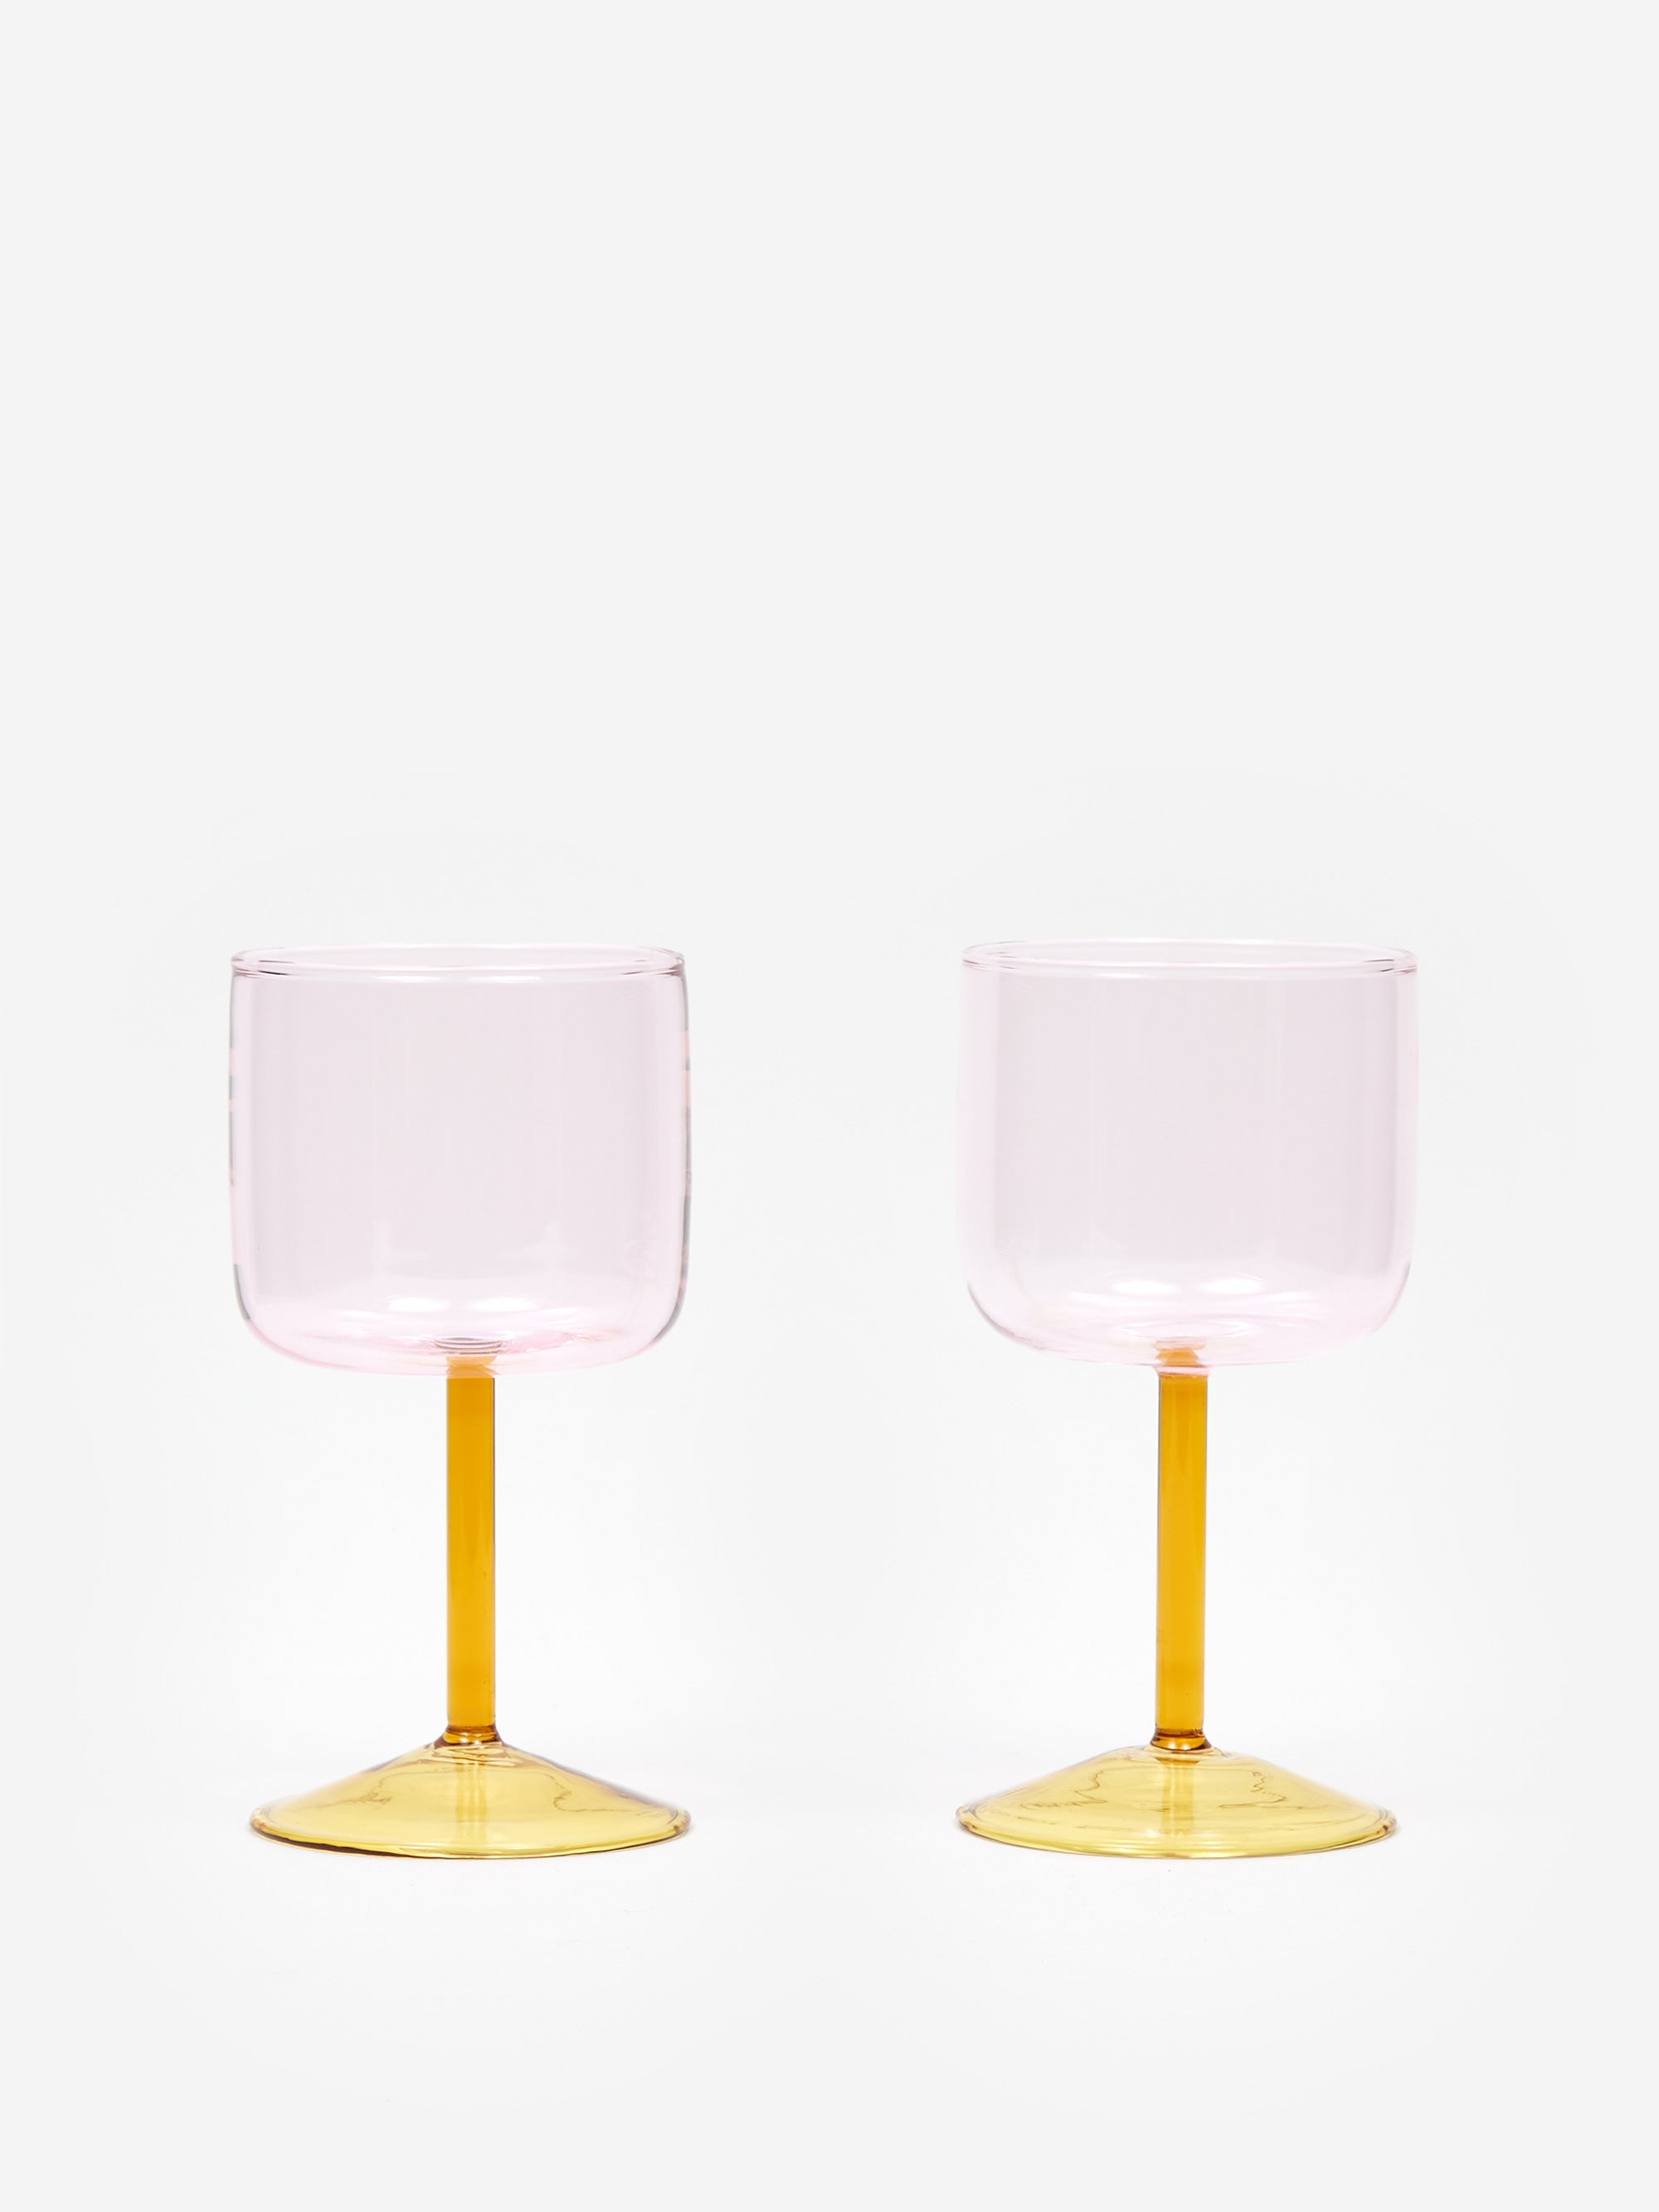 Hay - Tint Wine Glass, Green / Pink (Set of 2)